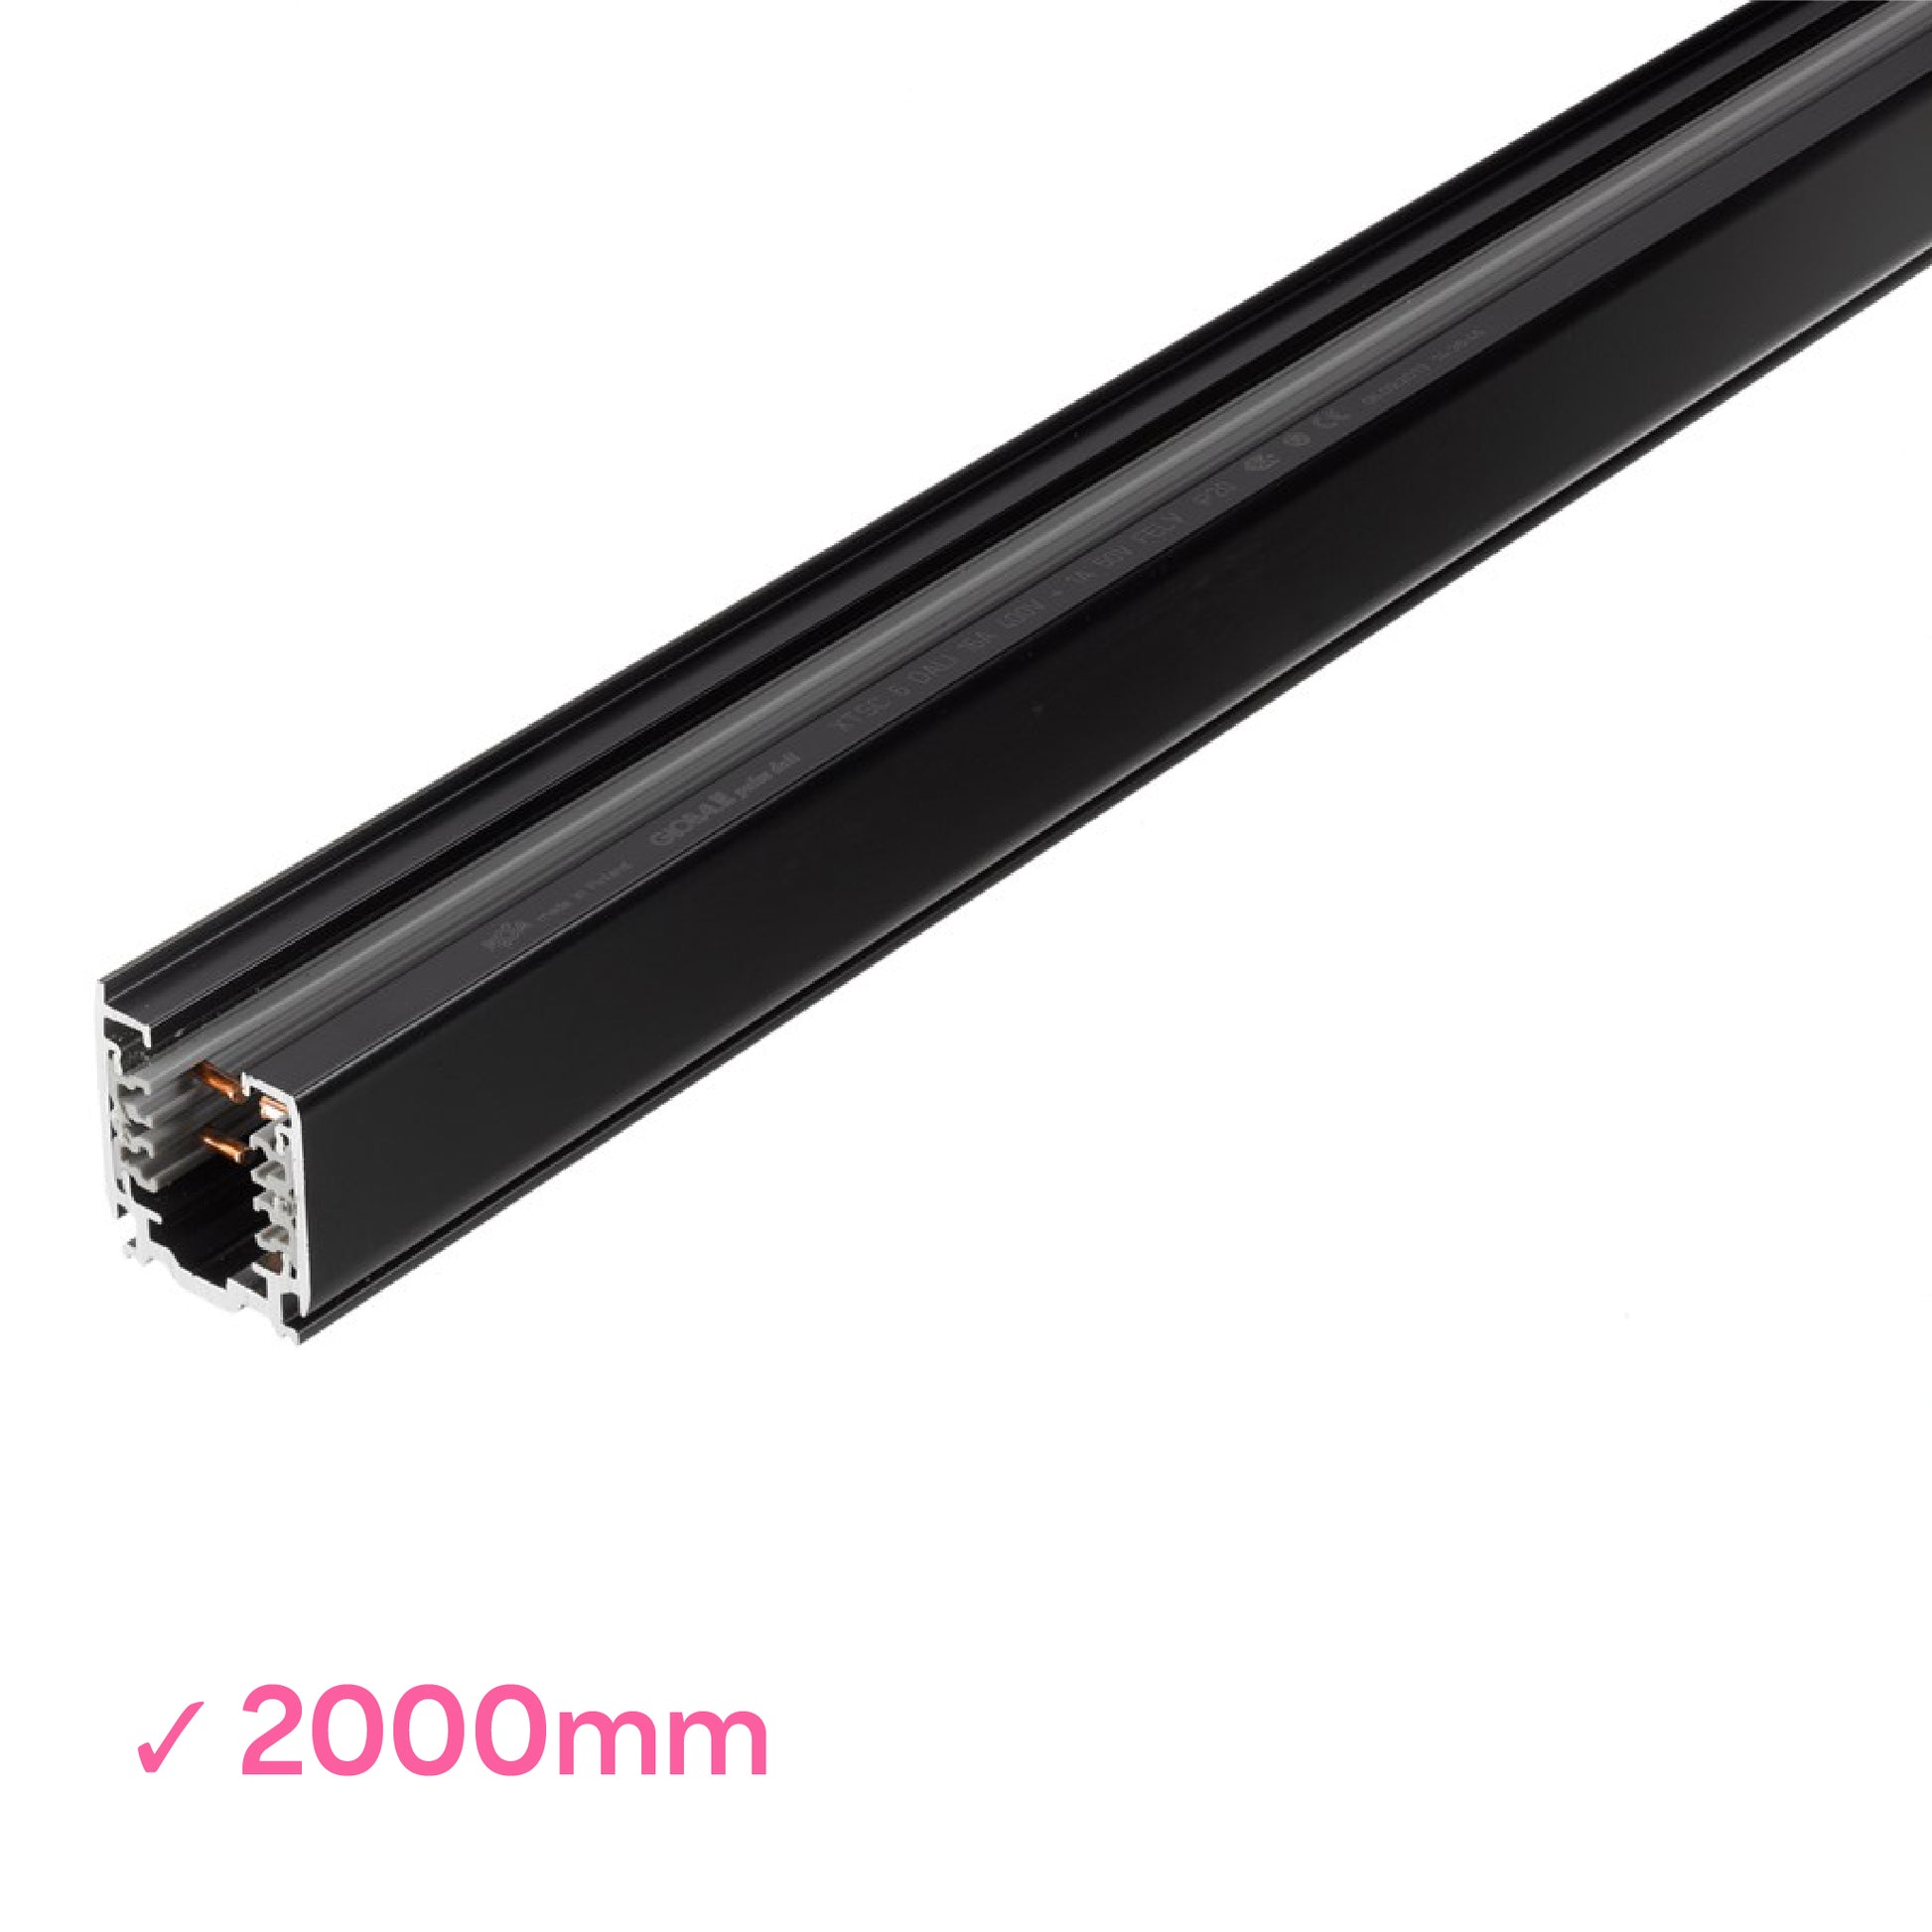 Global 2000mm or 2m black powder coated DALI 3 Circuit Track 2 metre surface mounted track by Nordic Aluminium <XTSC6200-2>